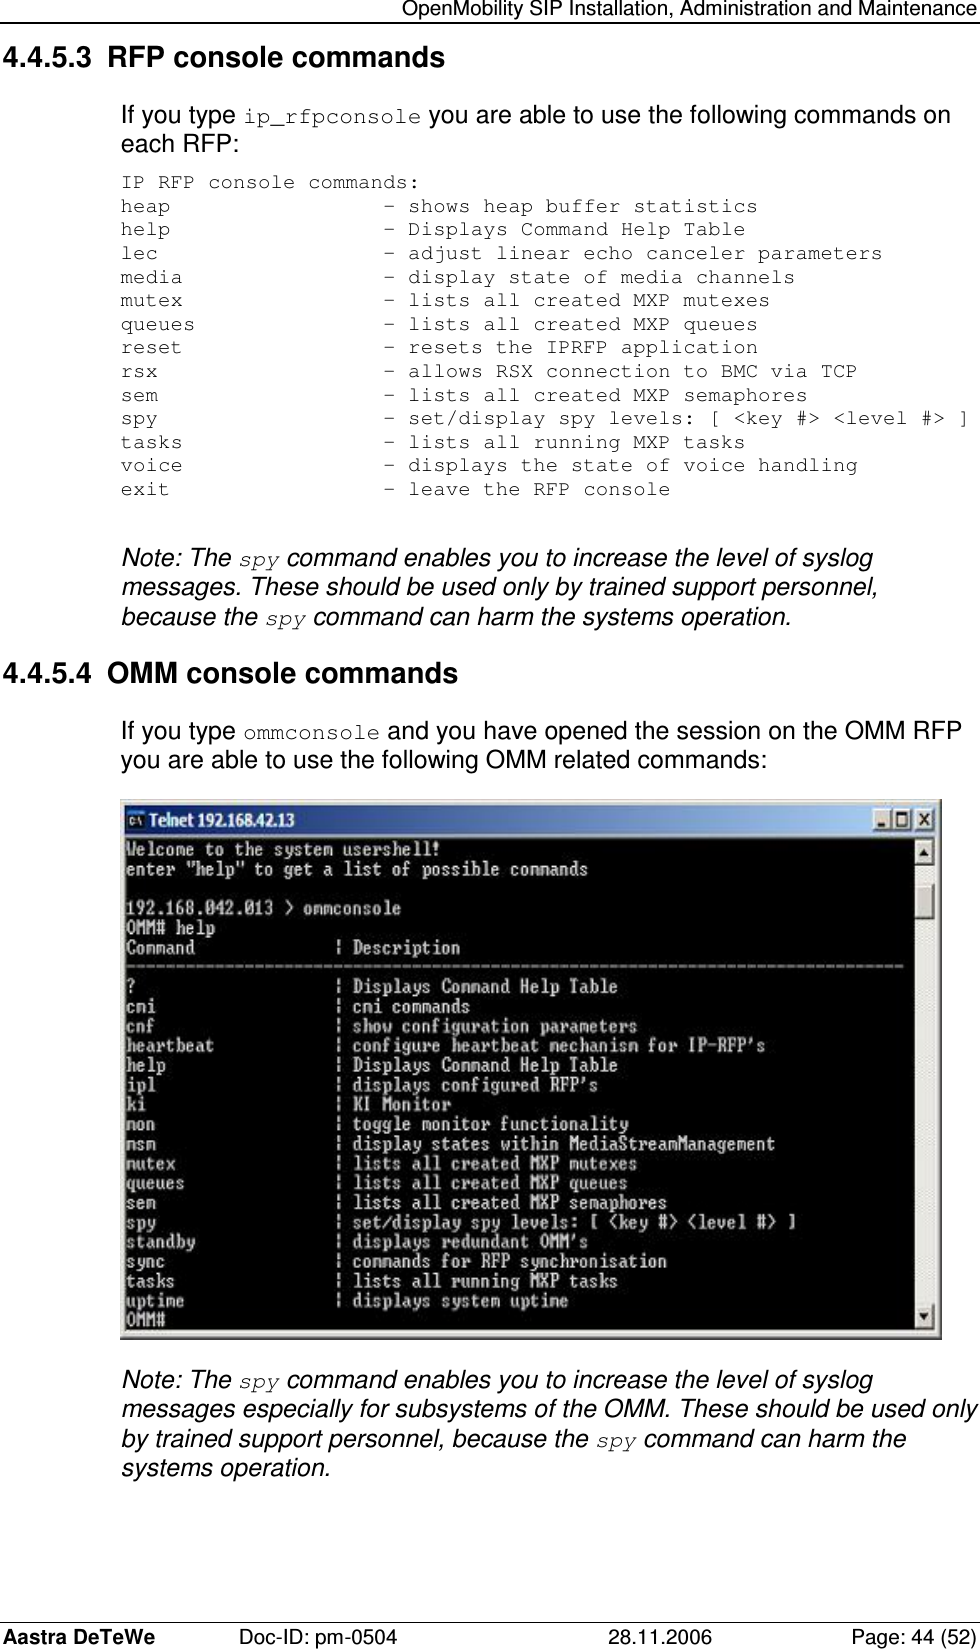   OpenMobility SIP Installation, Administration and Maintenance Aastra DeTeWe  Doc-ID: pm-0504  28.11.2006  Page: 44 (52) 4.4.5.3  RFP console commands If you type ip_rfpconsole you are able to use the following commands on each RFP: IP RFP console commands: heap                 - shows heap buffer statistics help                 - Displays Command Help Table lec                  - adjust linear echo canceler parameters media                - display state of media channels mutex                - lists all created MXP mutexes queues               - lists all created MXP queues reset                - resets the IPRFP application rsx                  - allows RSX connection to BMC via TCP sem                  - lists all created MXP semaphores spy                  - set/display spy levels: [ &lt;key #&gt; &lt;level #&gt; ] tasks                - lists all running MXP tasks voice                - displays the state of voice handling exit                 - leave the RFP console  Note: The spy command enables you to increase the level of syslog messages. These should be used only by trained support personnel, because the spy command can harm the systems operation. 4.4.5.4  OMM console commands If you type ommconsole and you have opened the session on the OMM RFP you are able to use the following OMM related commands:  Note: The spy command enables you to increase the level of syslog messages especially for subsystems of the OMM. These should be used only by trained support personnel, because the spy command can harm the systems operation.   